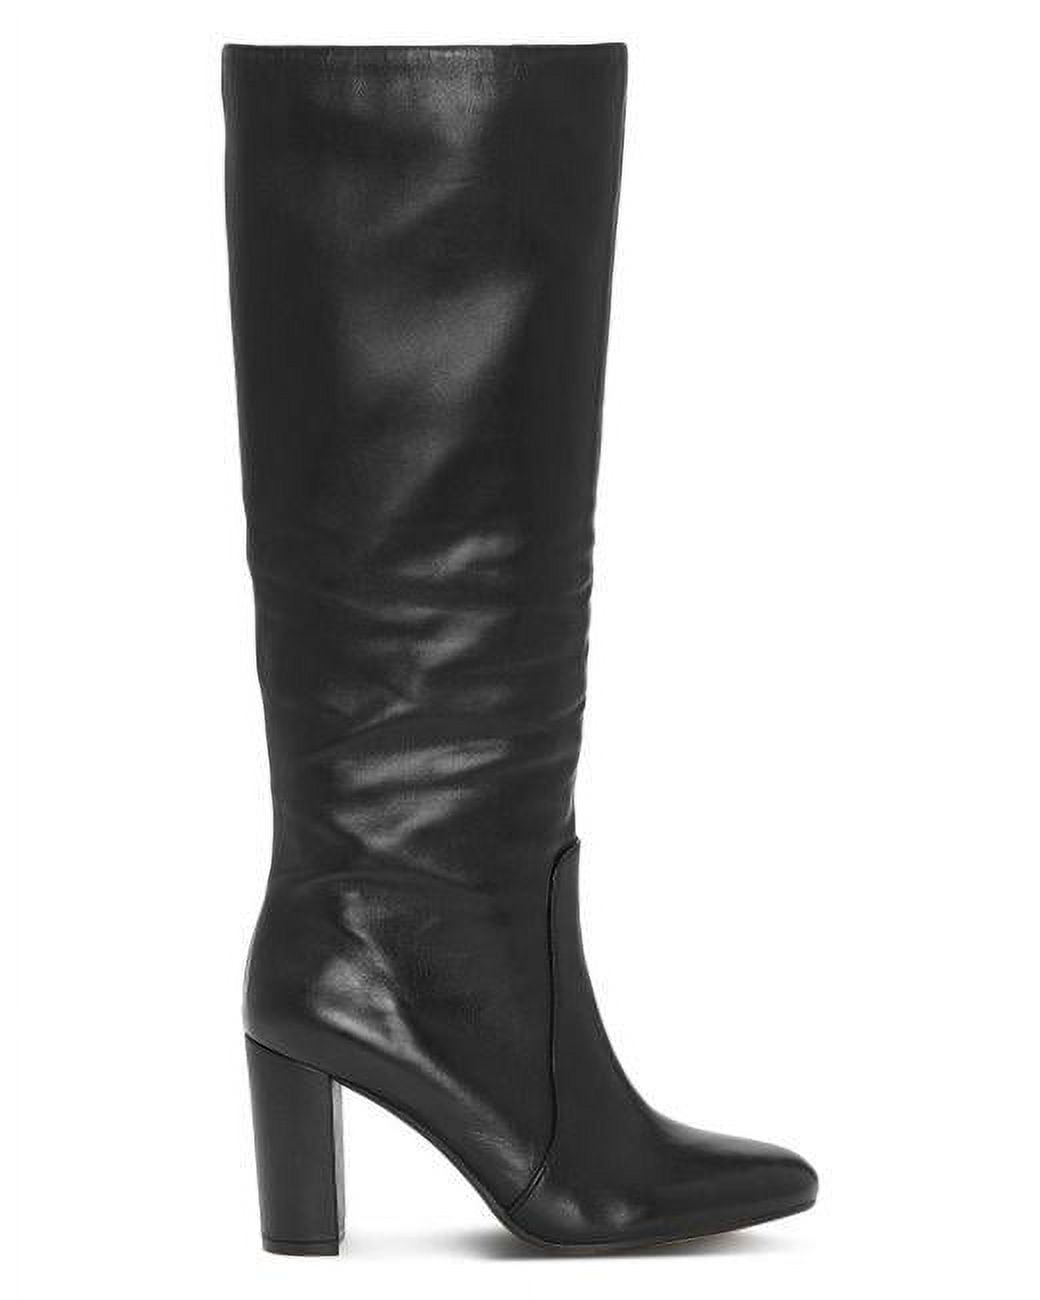 Vince Camuto Sessily Black Leather Block Heel Knee High Round Toe ...